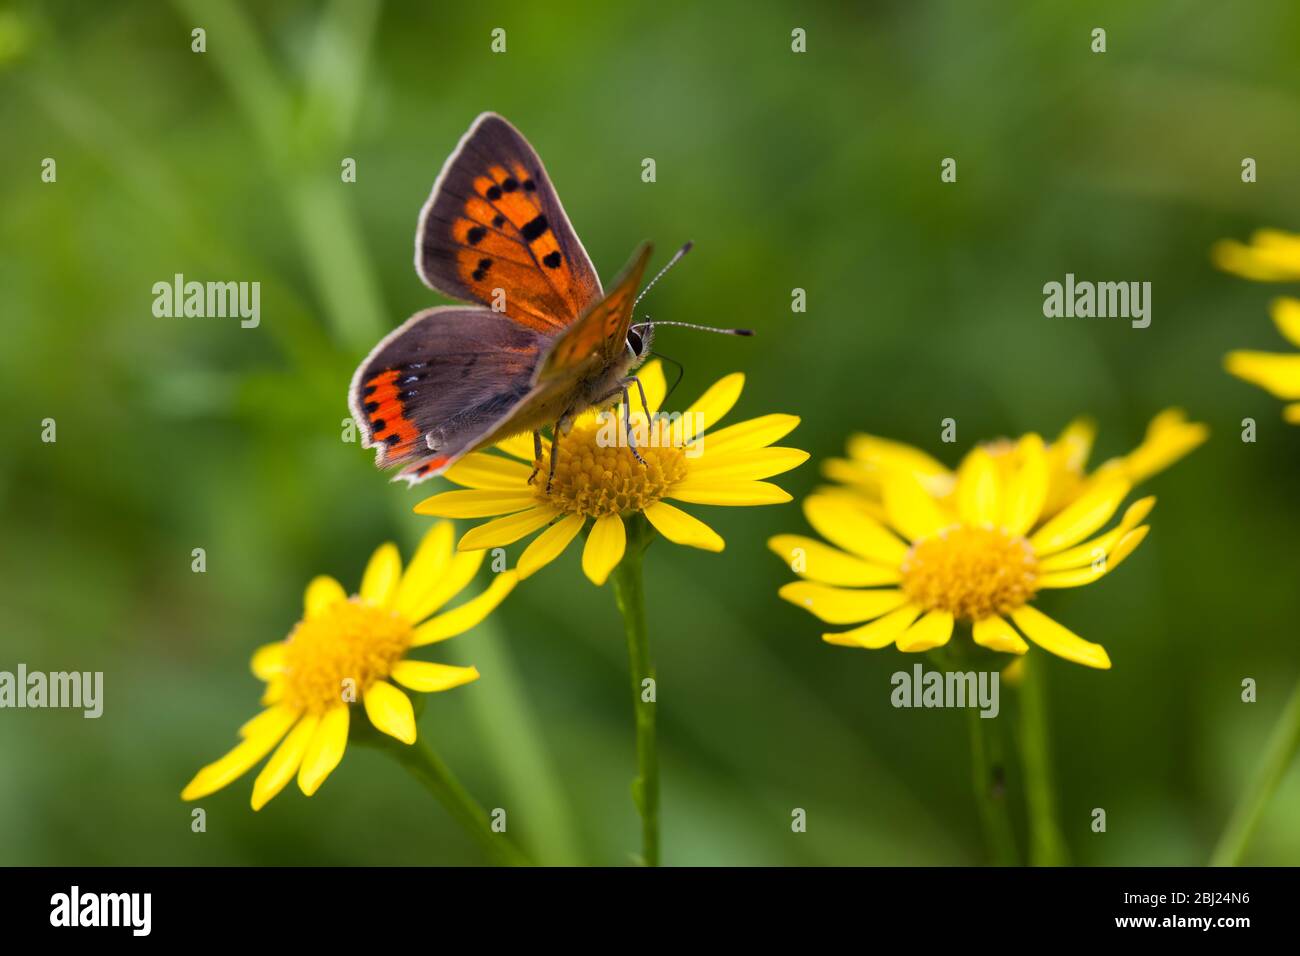 Close-up of a butterfly on yellow flower Stock Photo